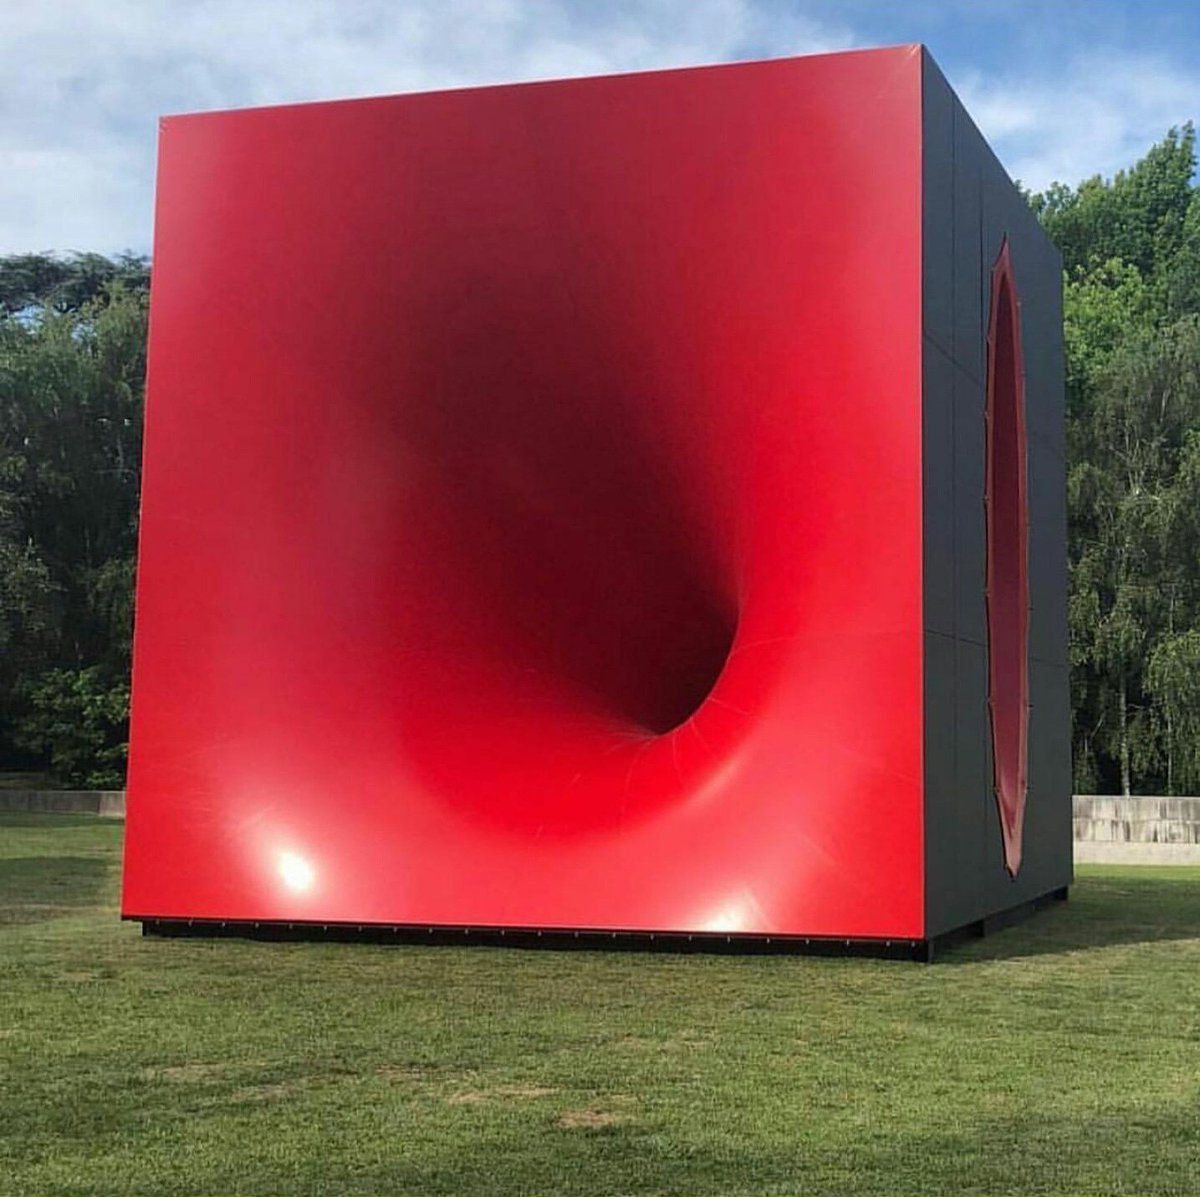 'Sculpture occupies the same space as your body.'
- Anish Kapoor
----------------------------
#bluechipart #bluechipartist  #SwetlanaCardoso 
Image - minimalandcontemporary/instagram